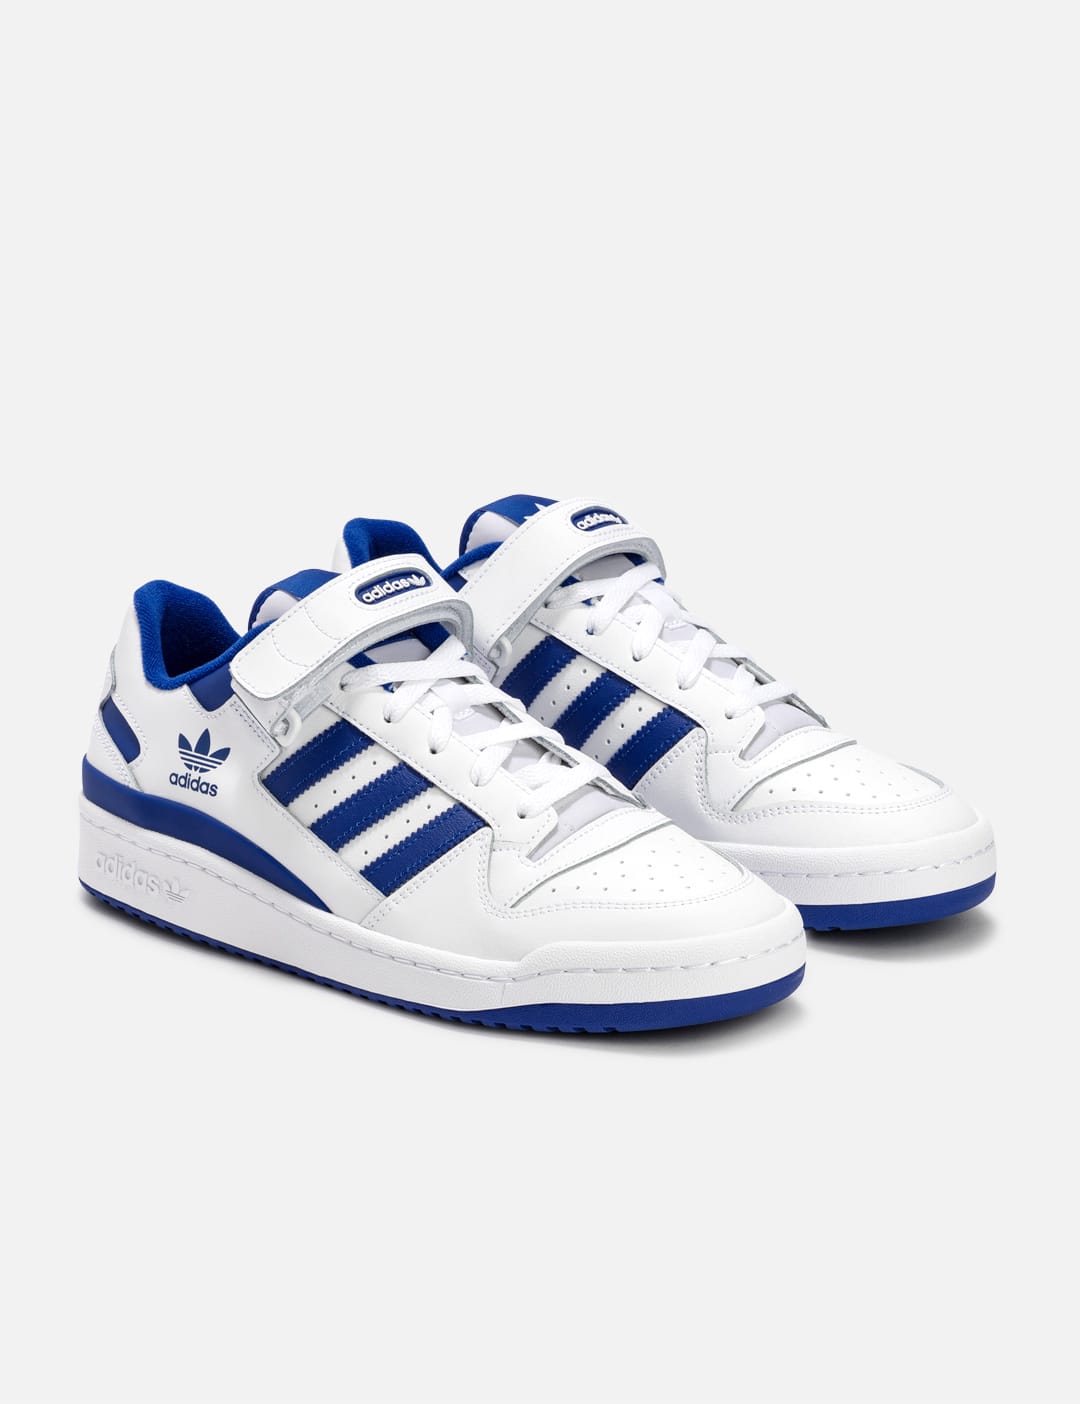 Adidas Originals BW Army 'Orbit Blue' Available sizes for pre order: 5 to 9  Womens 7 to 11 Mens 7,500 - 8,000 pesos only! ETA 1 -... | Instagram